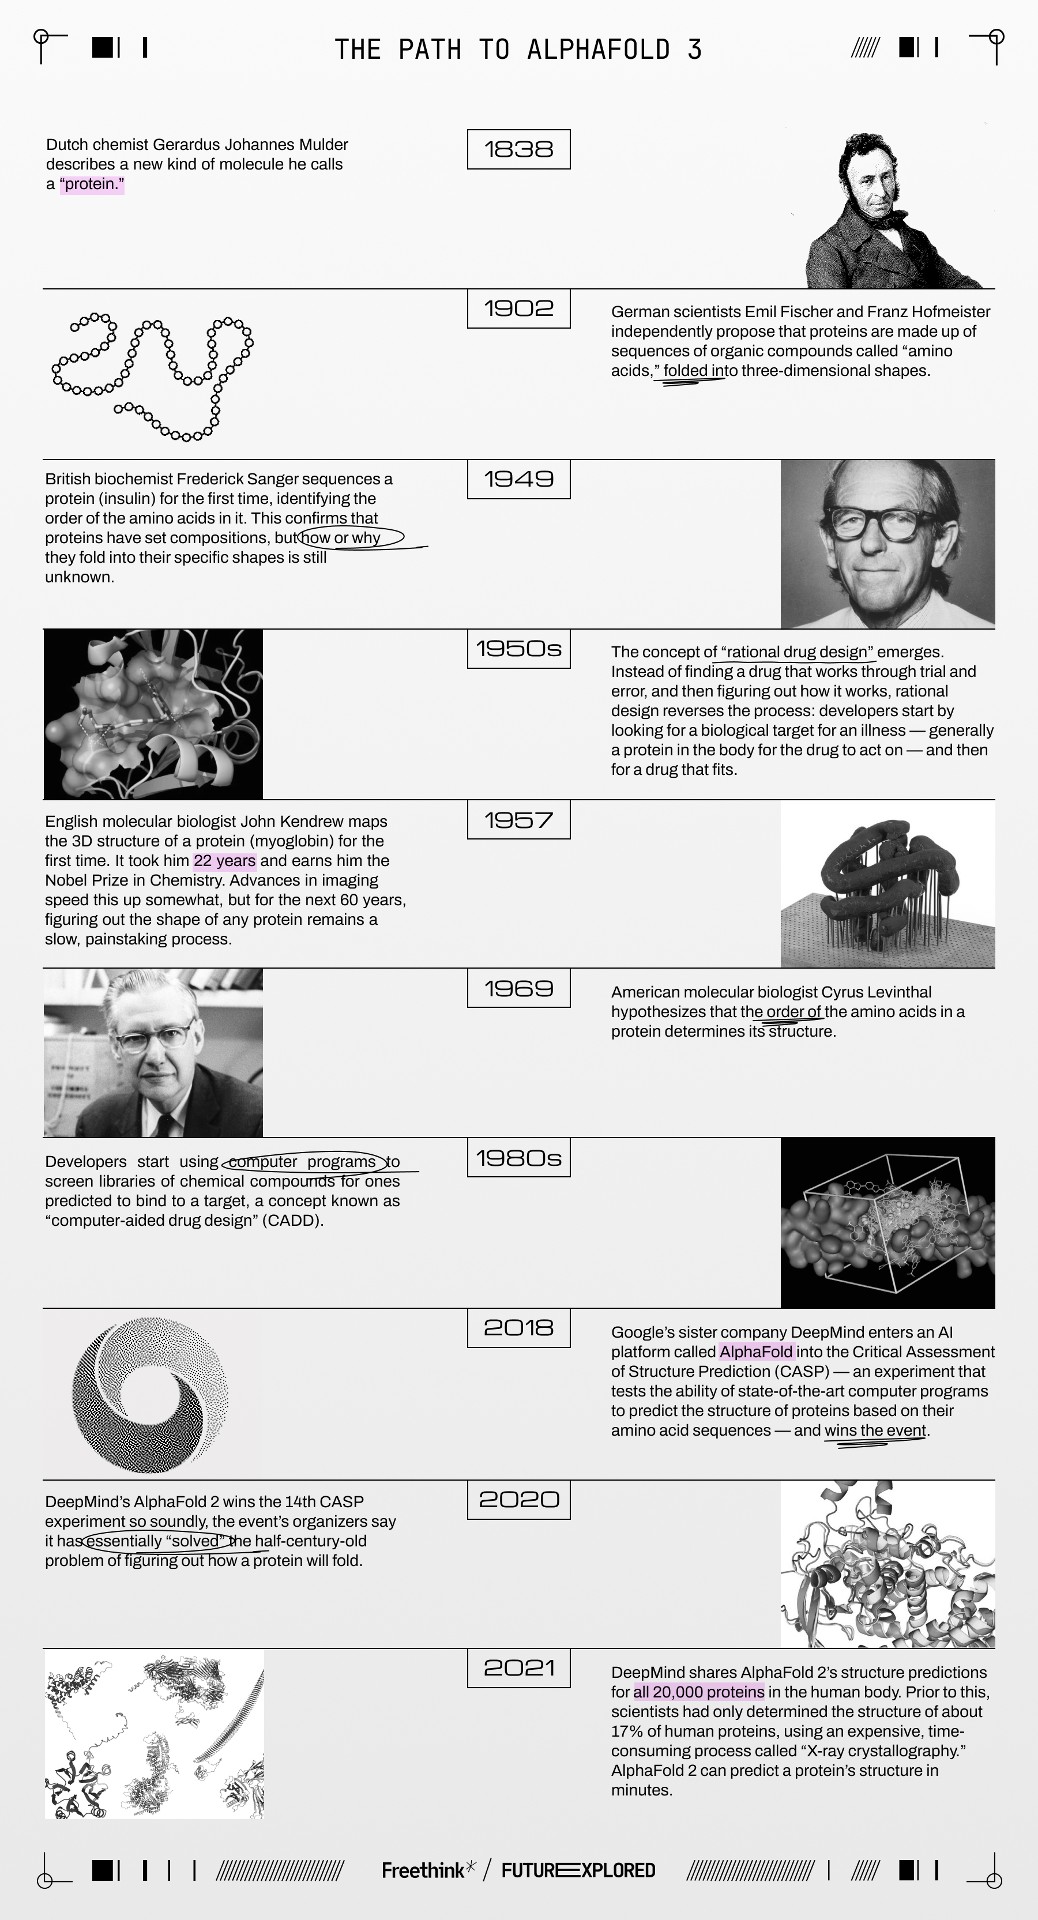 A timeline detailing the development of AlphaFold 3, highlighting key milestones in molecular biology, from the initial hypothesis in 1936 to the advancements in AI and protein folding predictions by 2021.